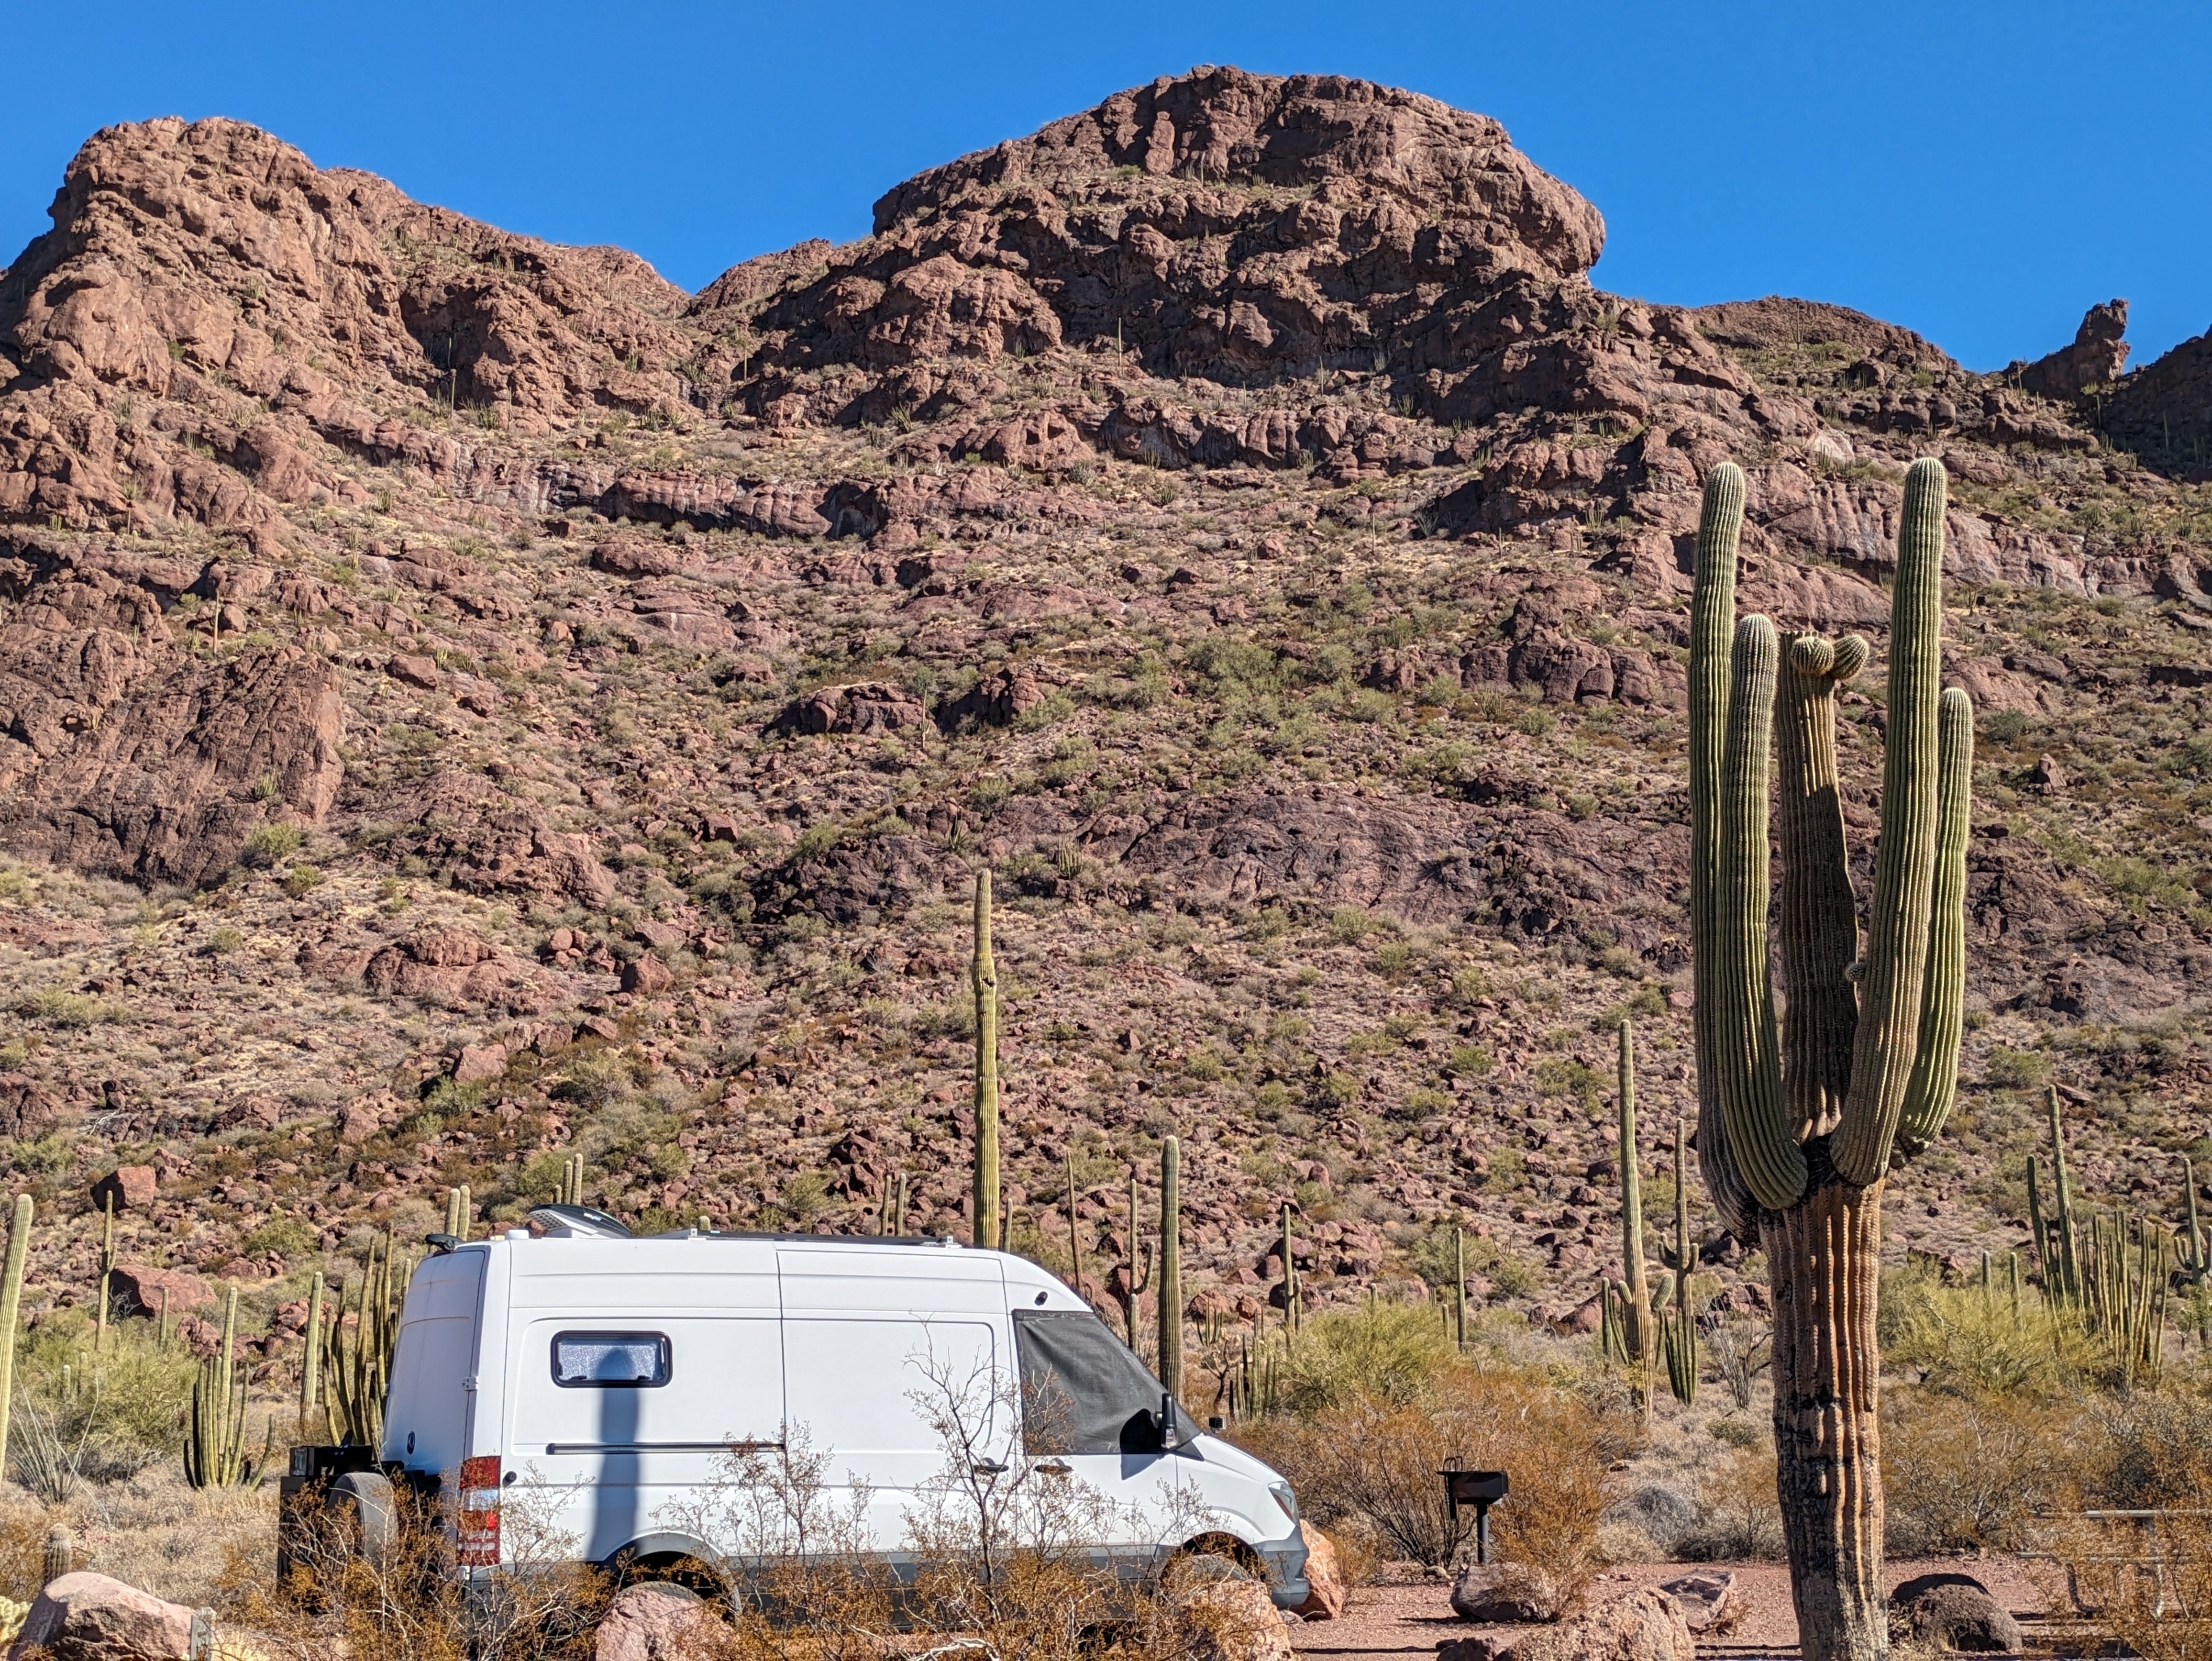 Camper submitted image from Alamo Canyon Primitive Campground — Organ Pipe Cactus National Monument - 3